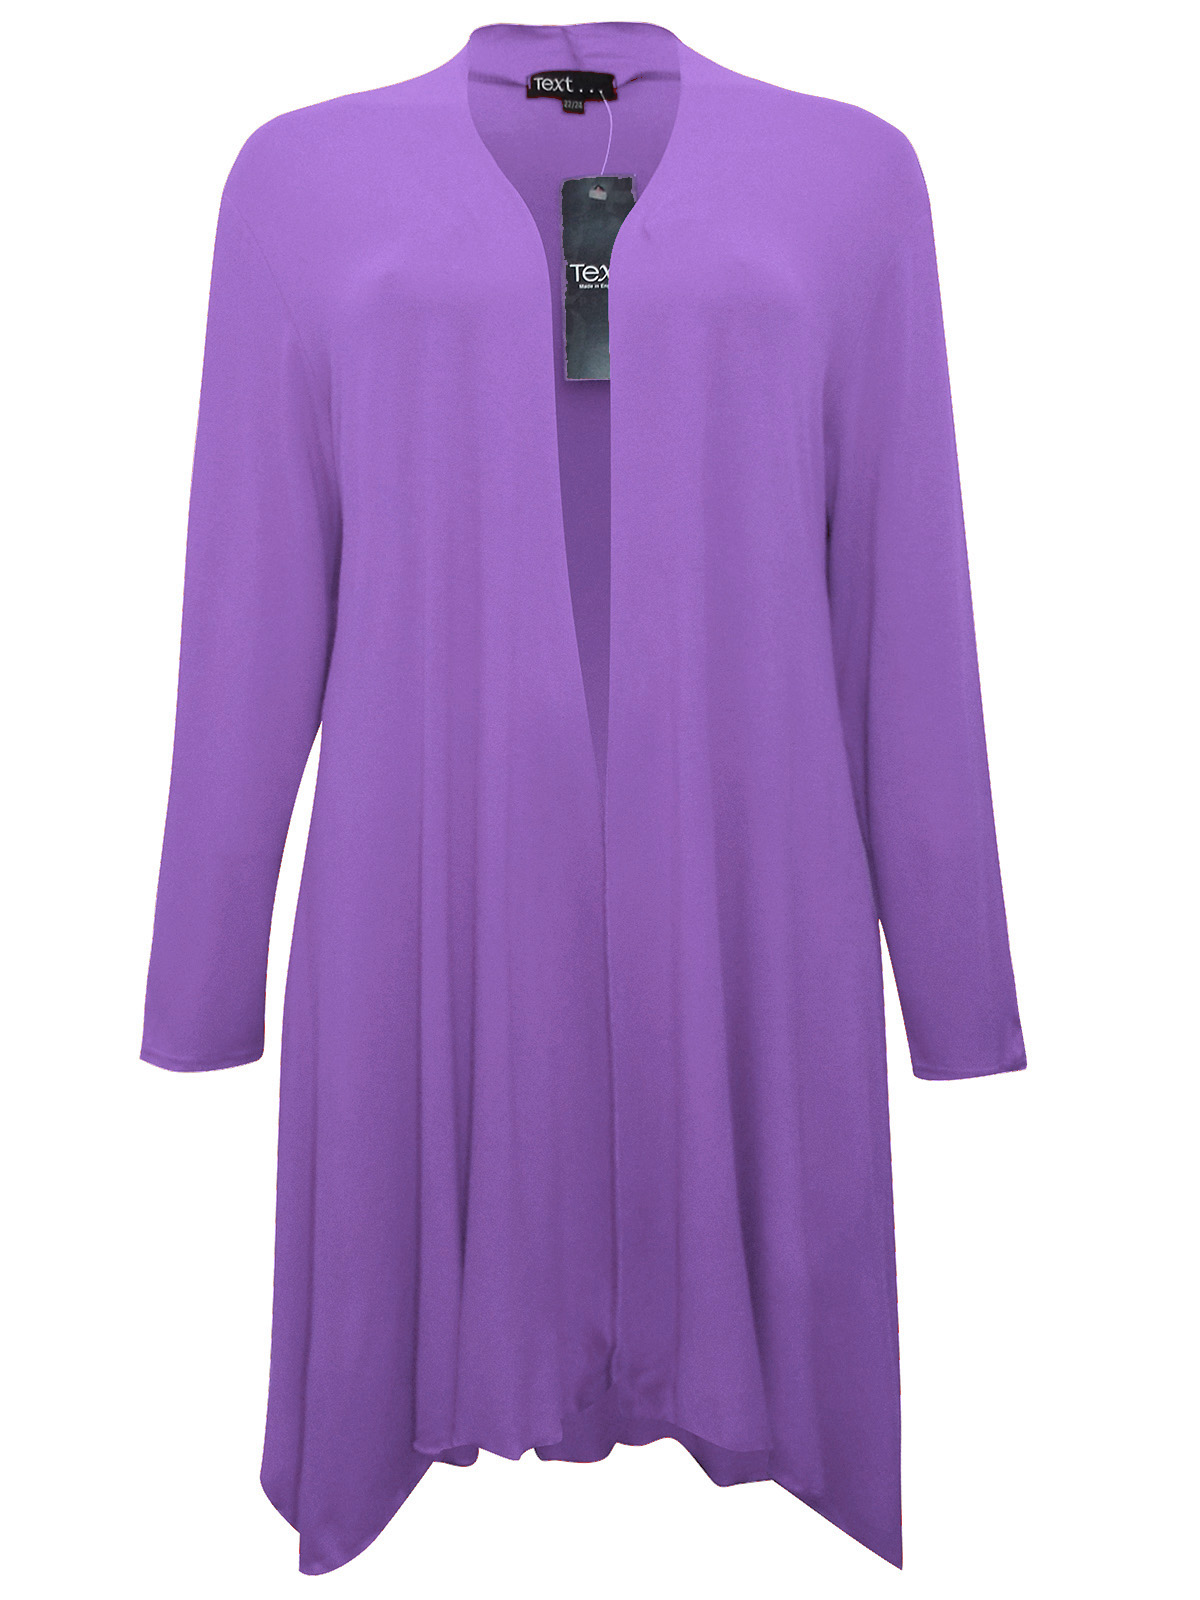 //text.. - - BRIGHT-PURPLE Open Front Long Sleeve Jersey Cardigan w ...